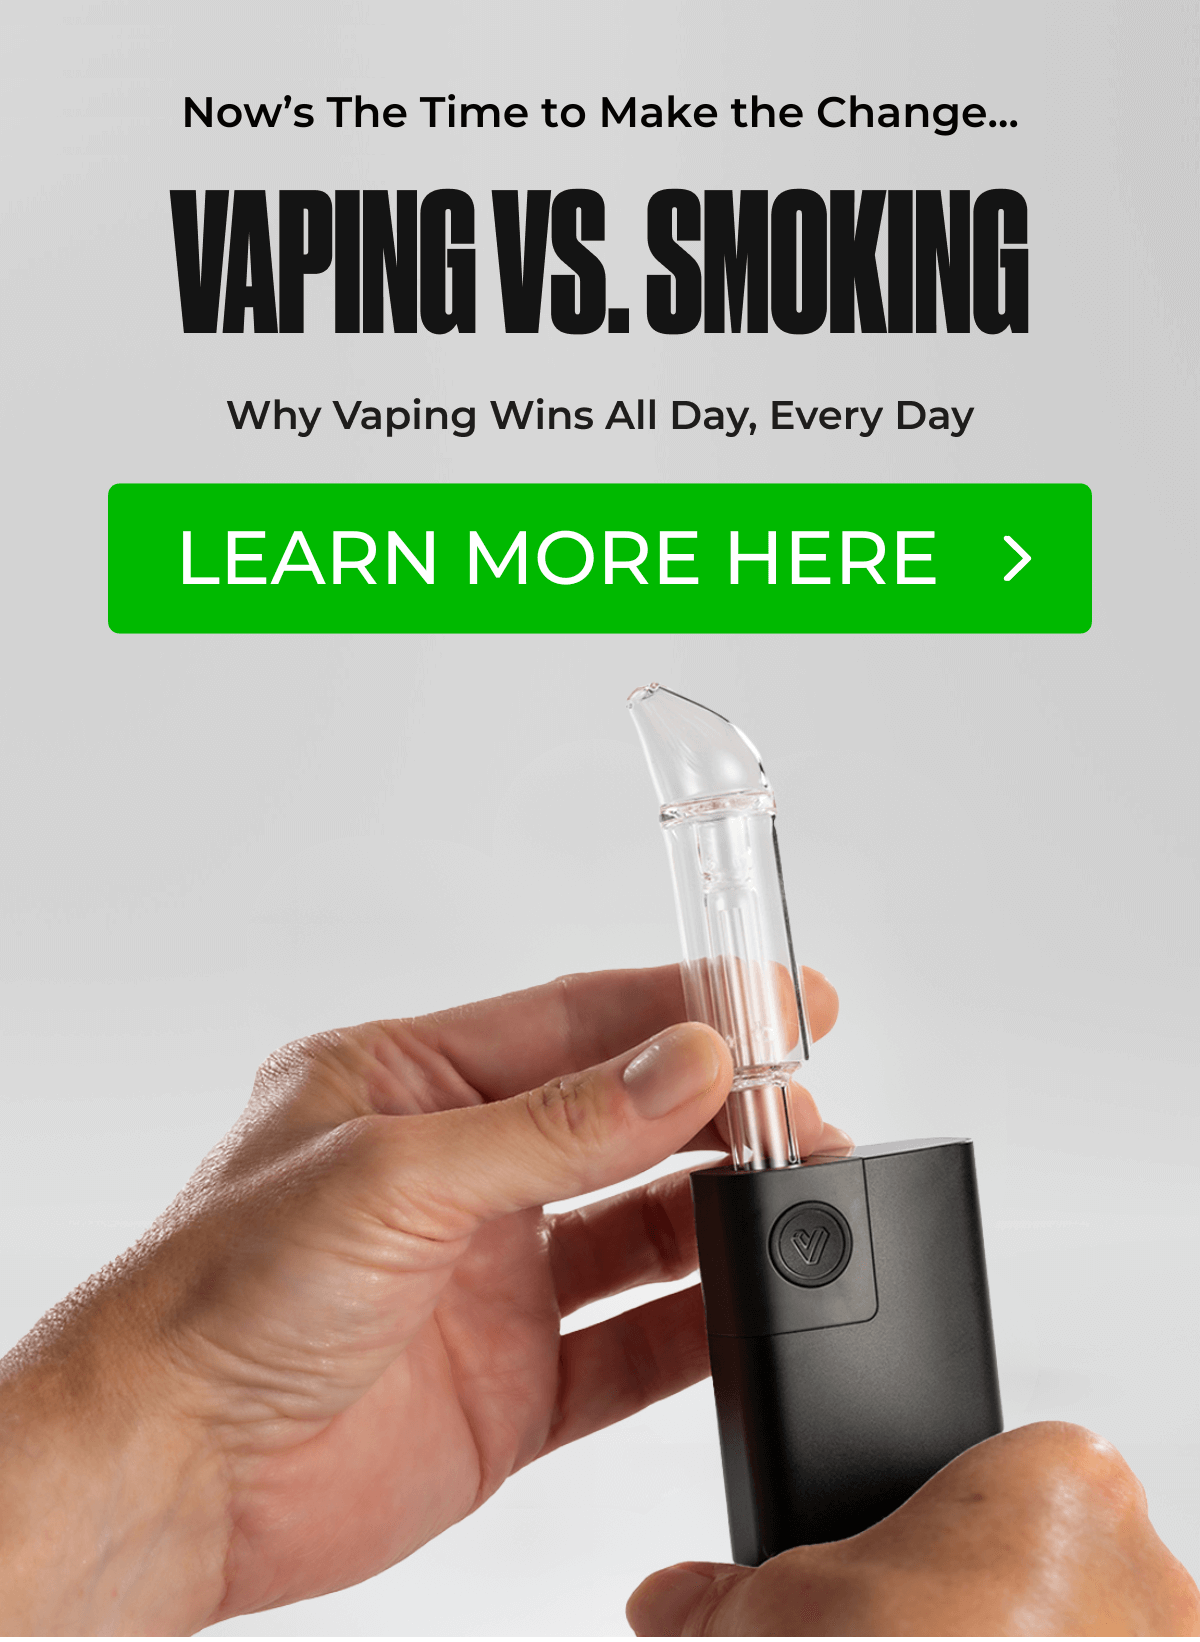 It's time to make the switch: Vaping vs. Smoking